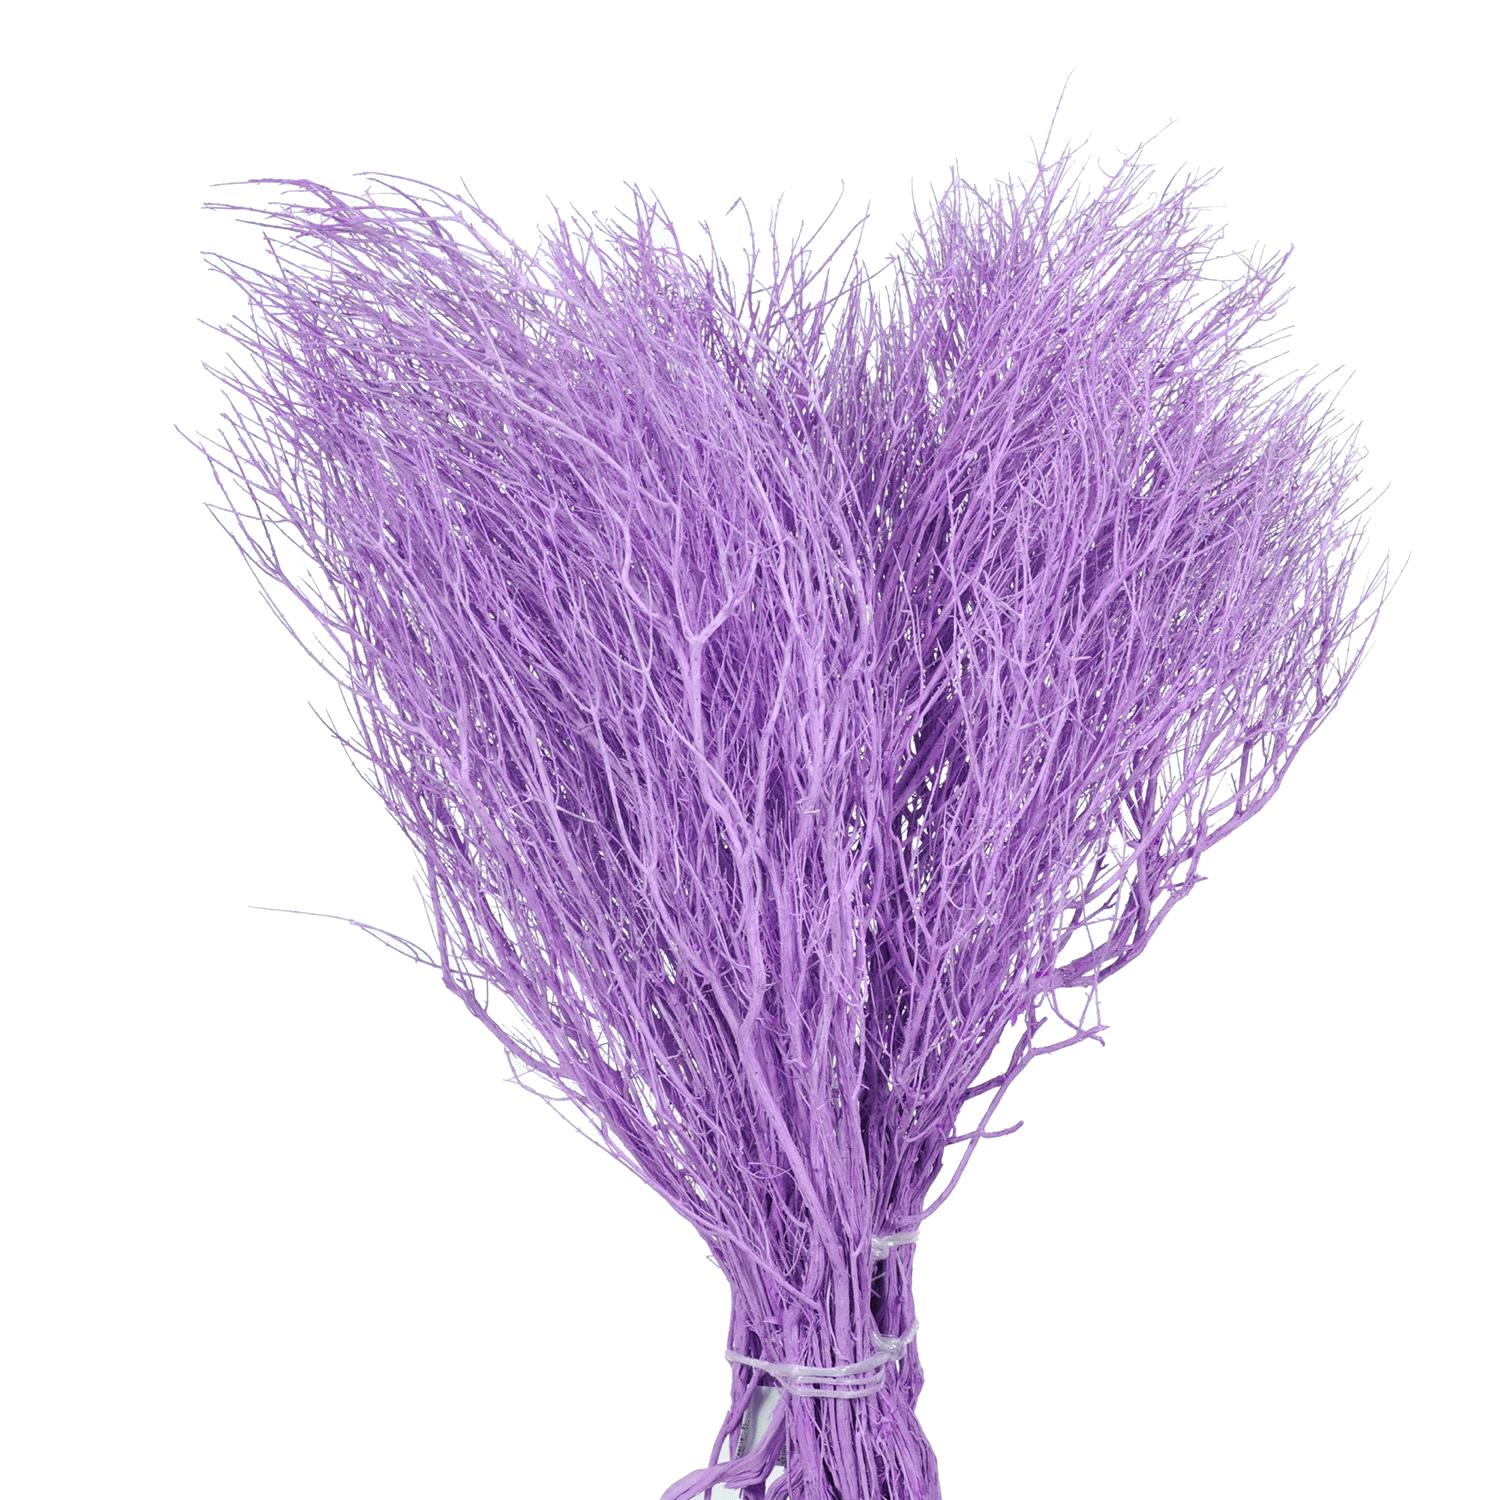 NATURAL PRODUCTS DRIED FLOWERS AND ERBS, COLORED GRASS AND FLOWERS, STIPA 40 CM MAZZO SBIA/COL